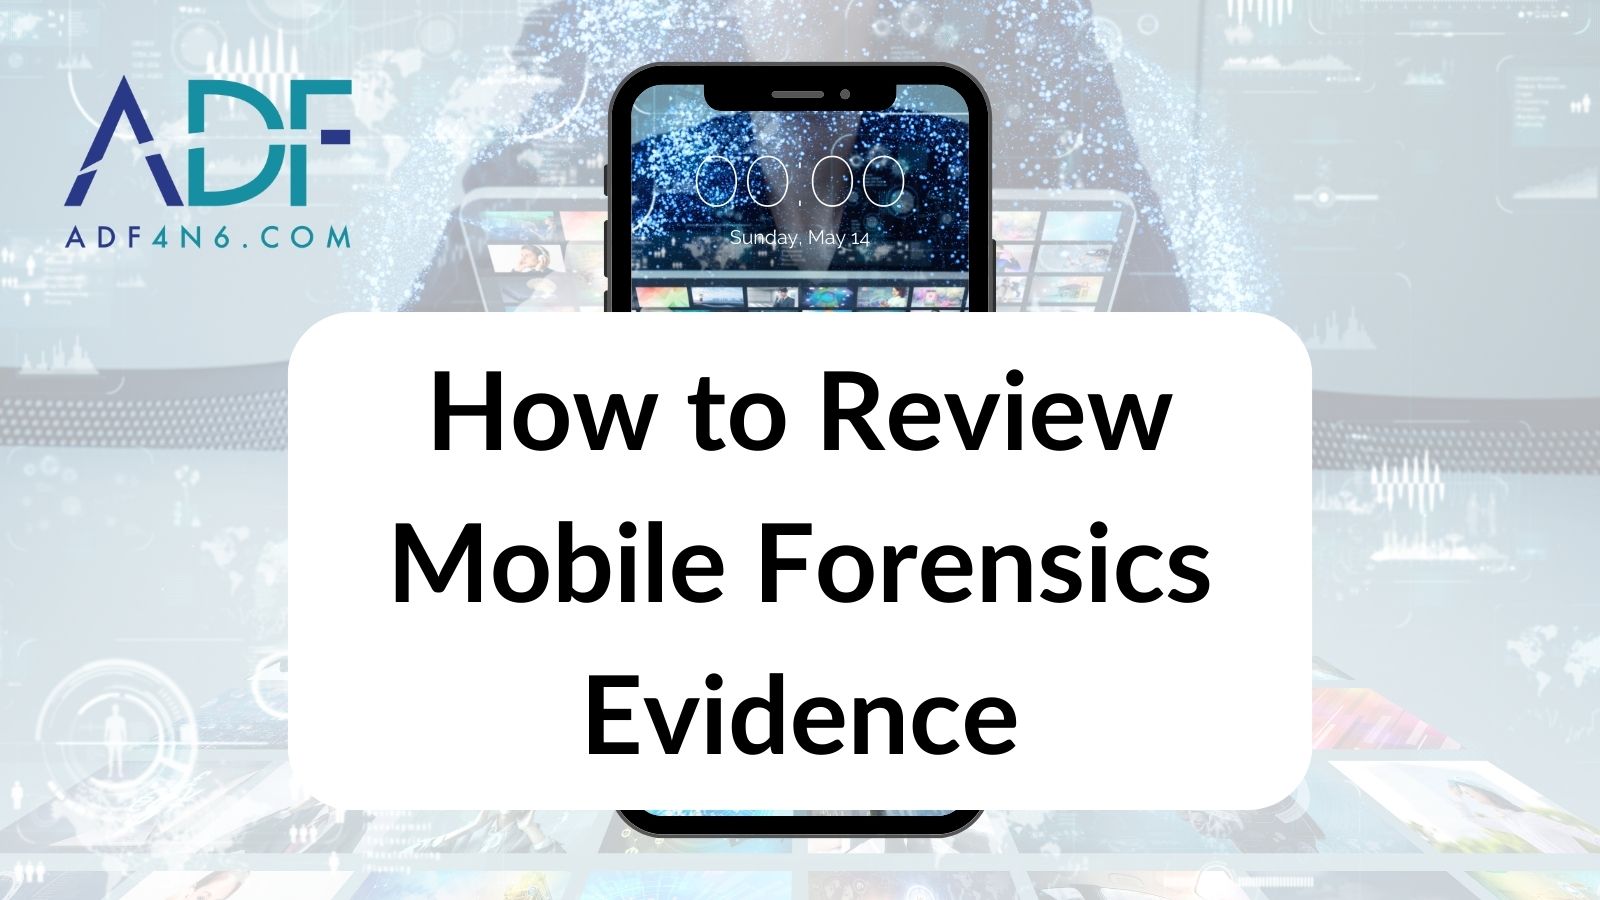 How to Review Mobile Forensics Evidence